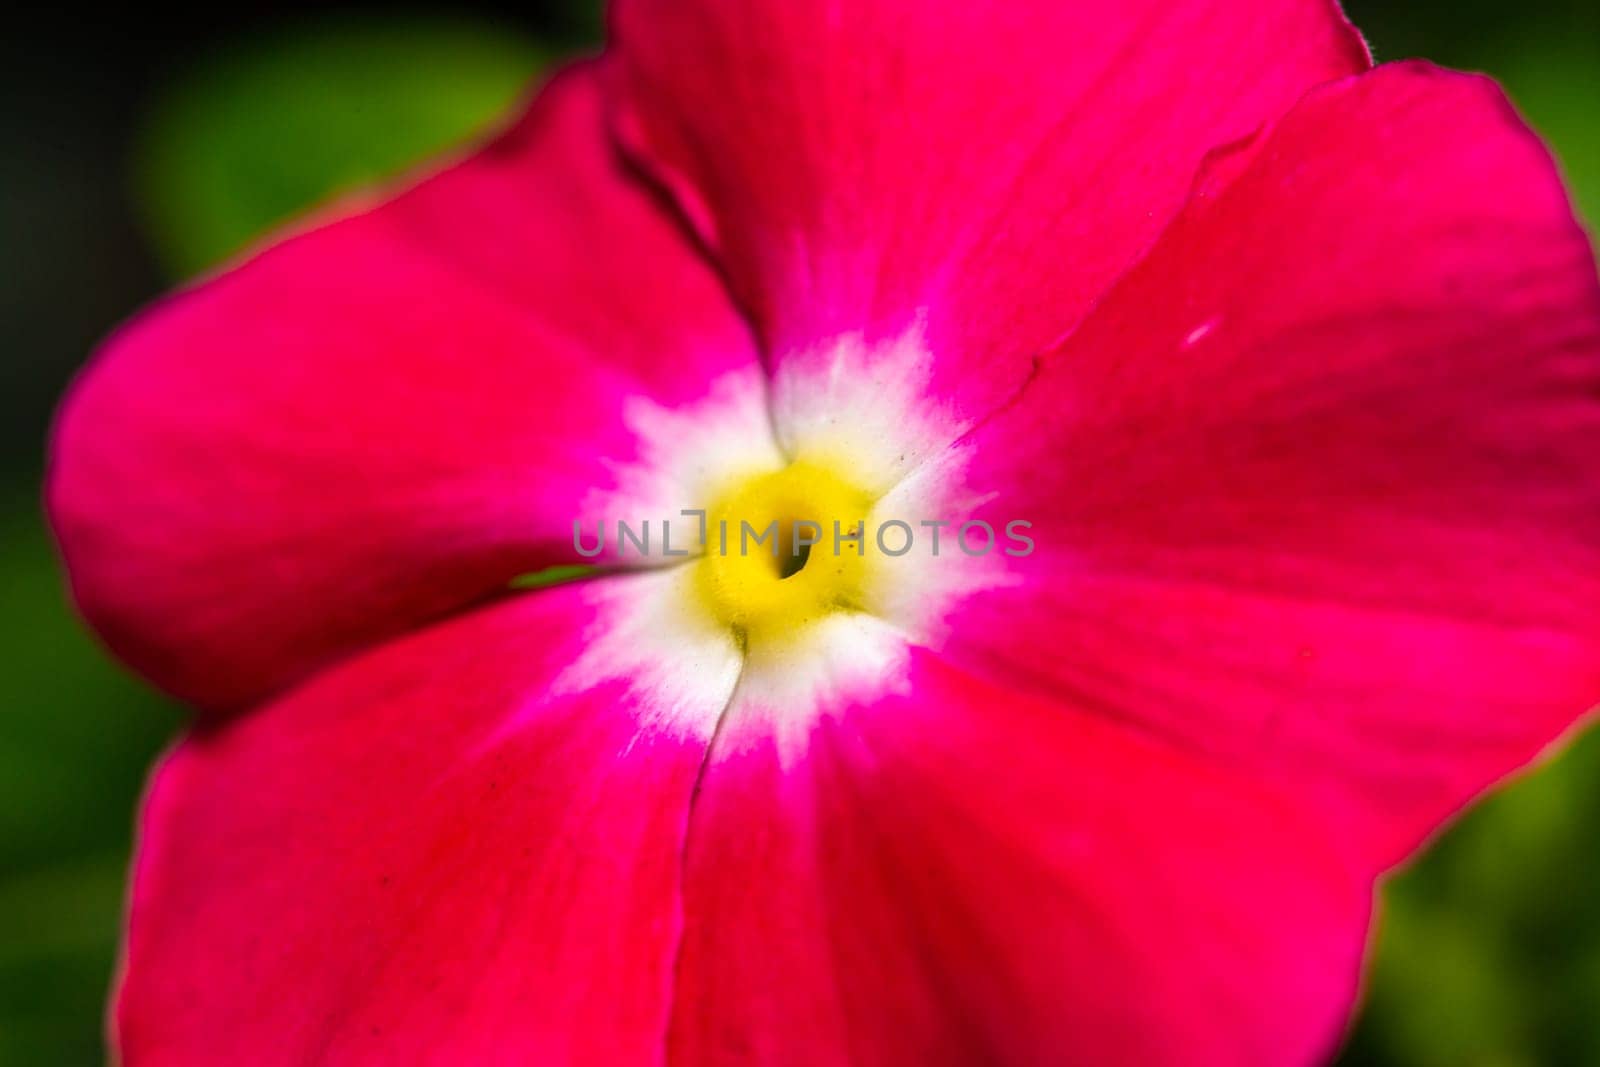 Catharanthus roseus - close-up of flowers of a plant with red petals by Hydrobiolog